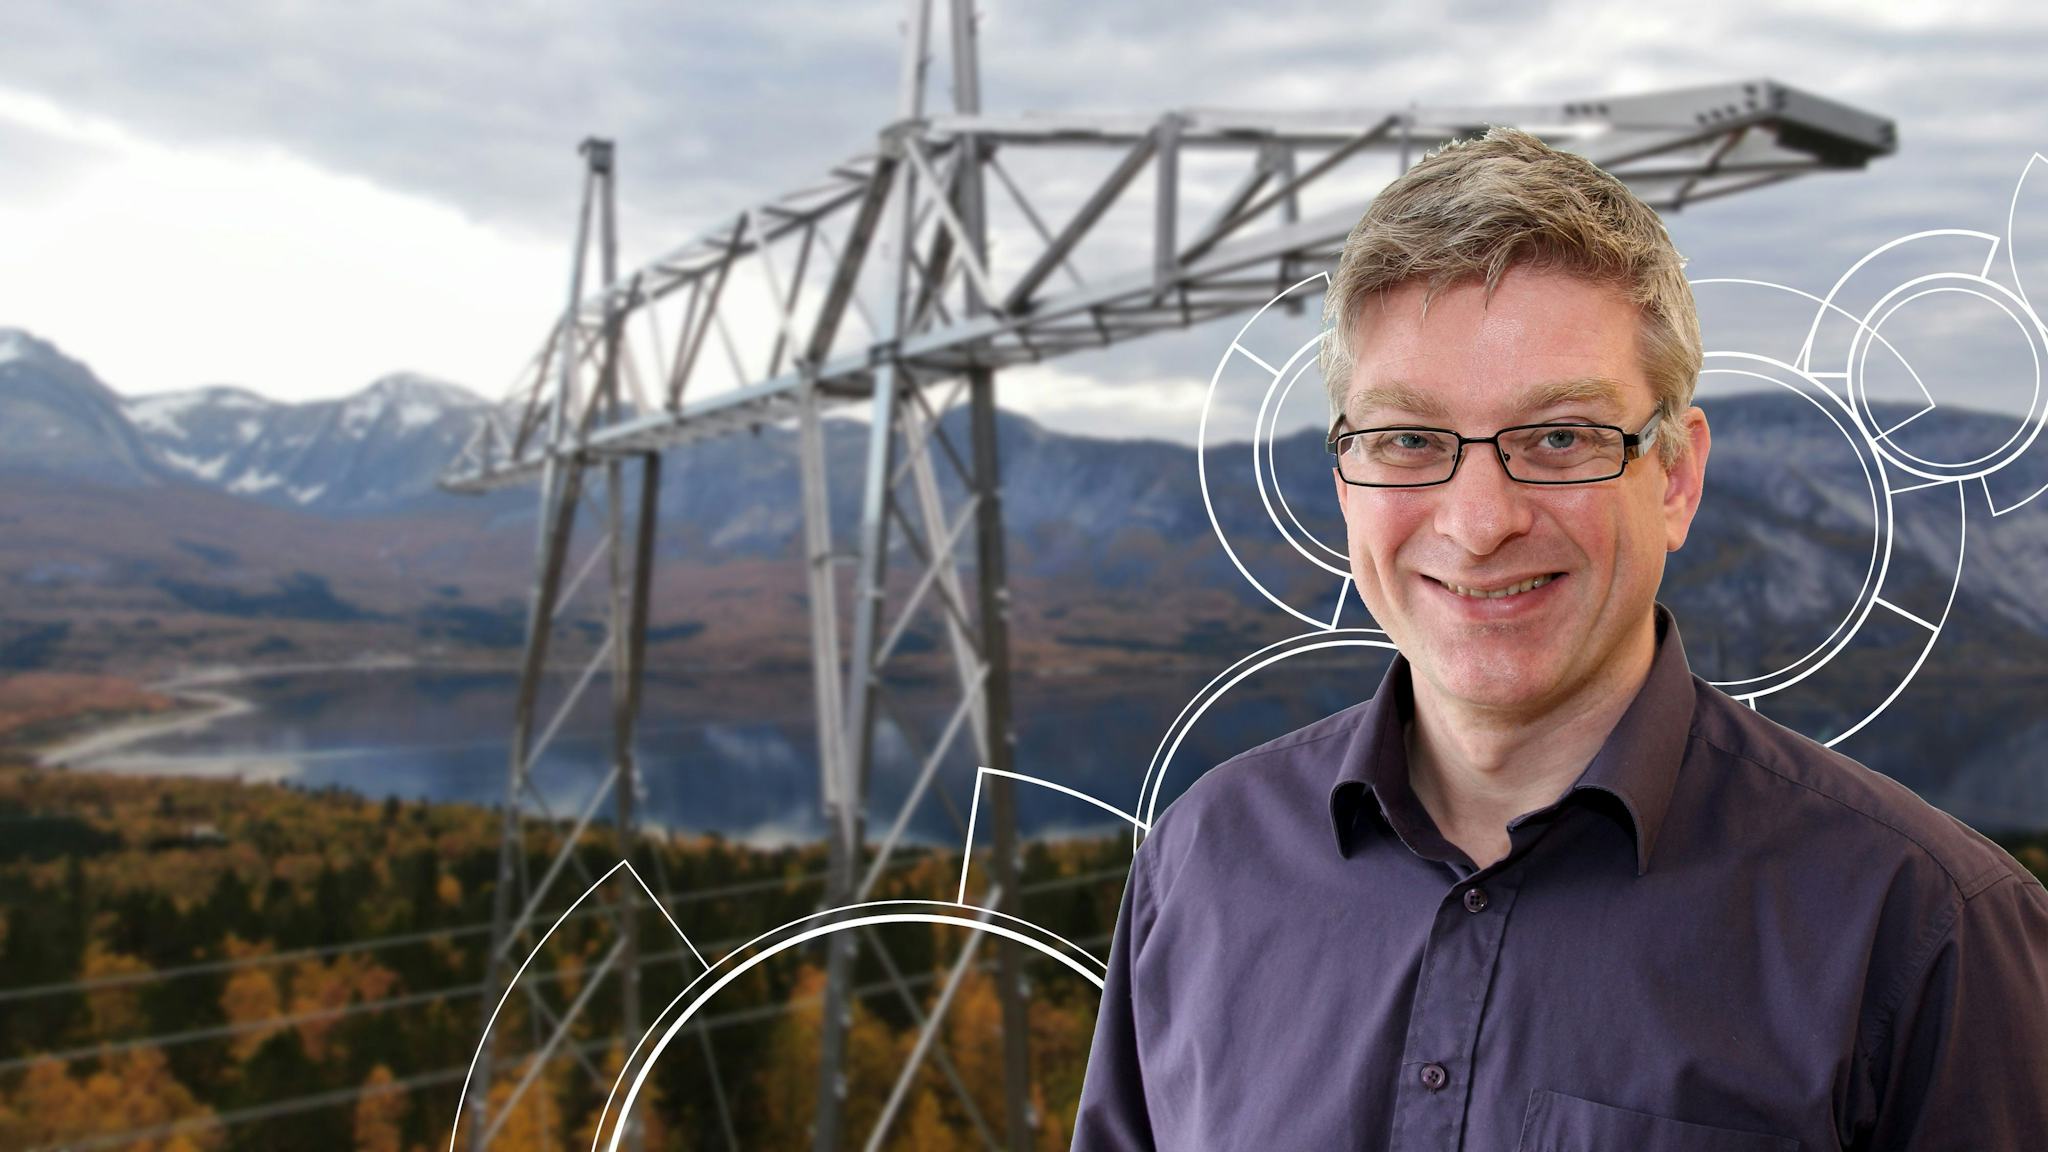 A man with smile superimposed in front of a background showing a large electricity pylon